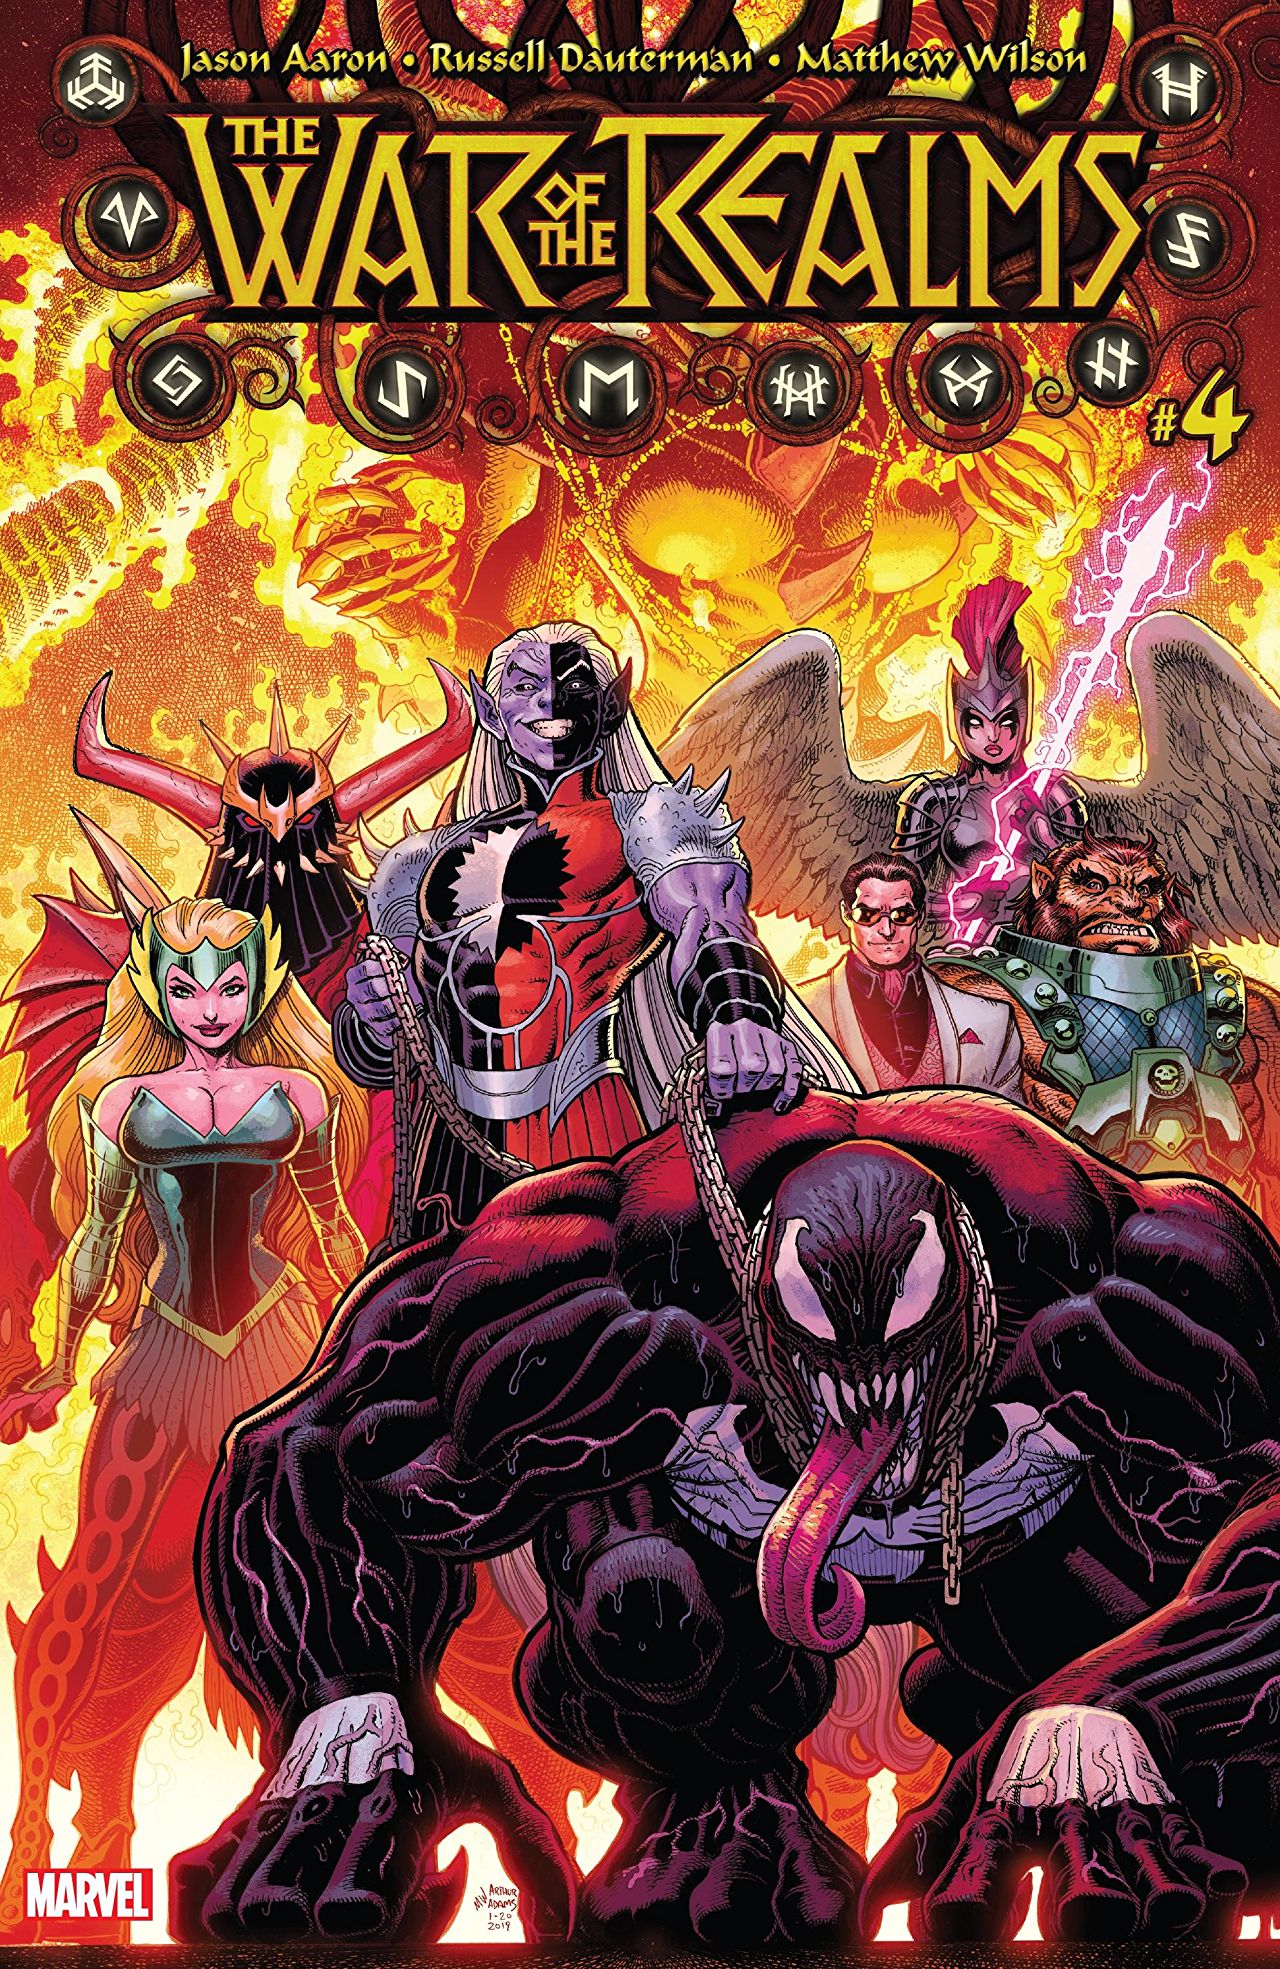 War of the Realms #4 review: Dwarves and spiders and Light Elves, oh my!